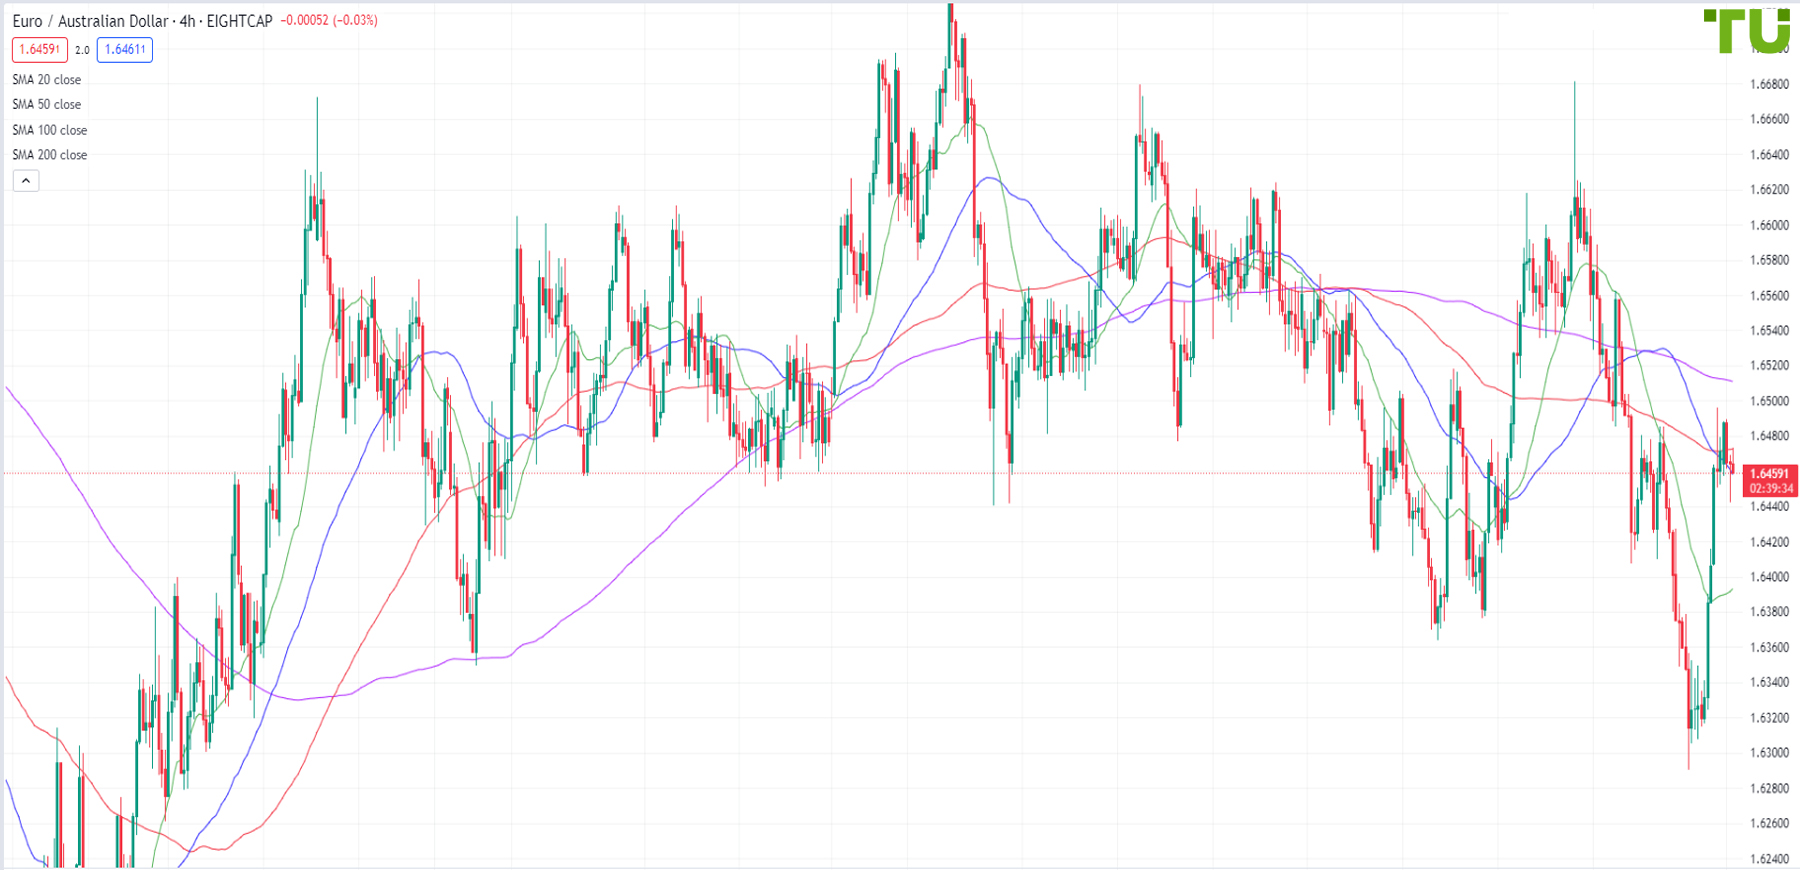 EUR/AUD returned to the 1.6490 resistance